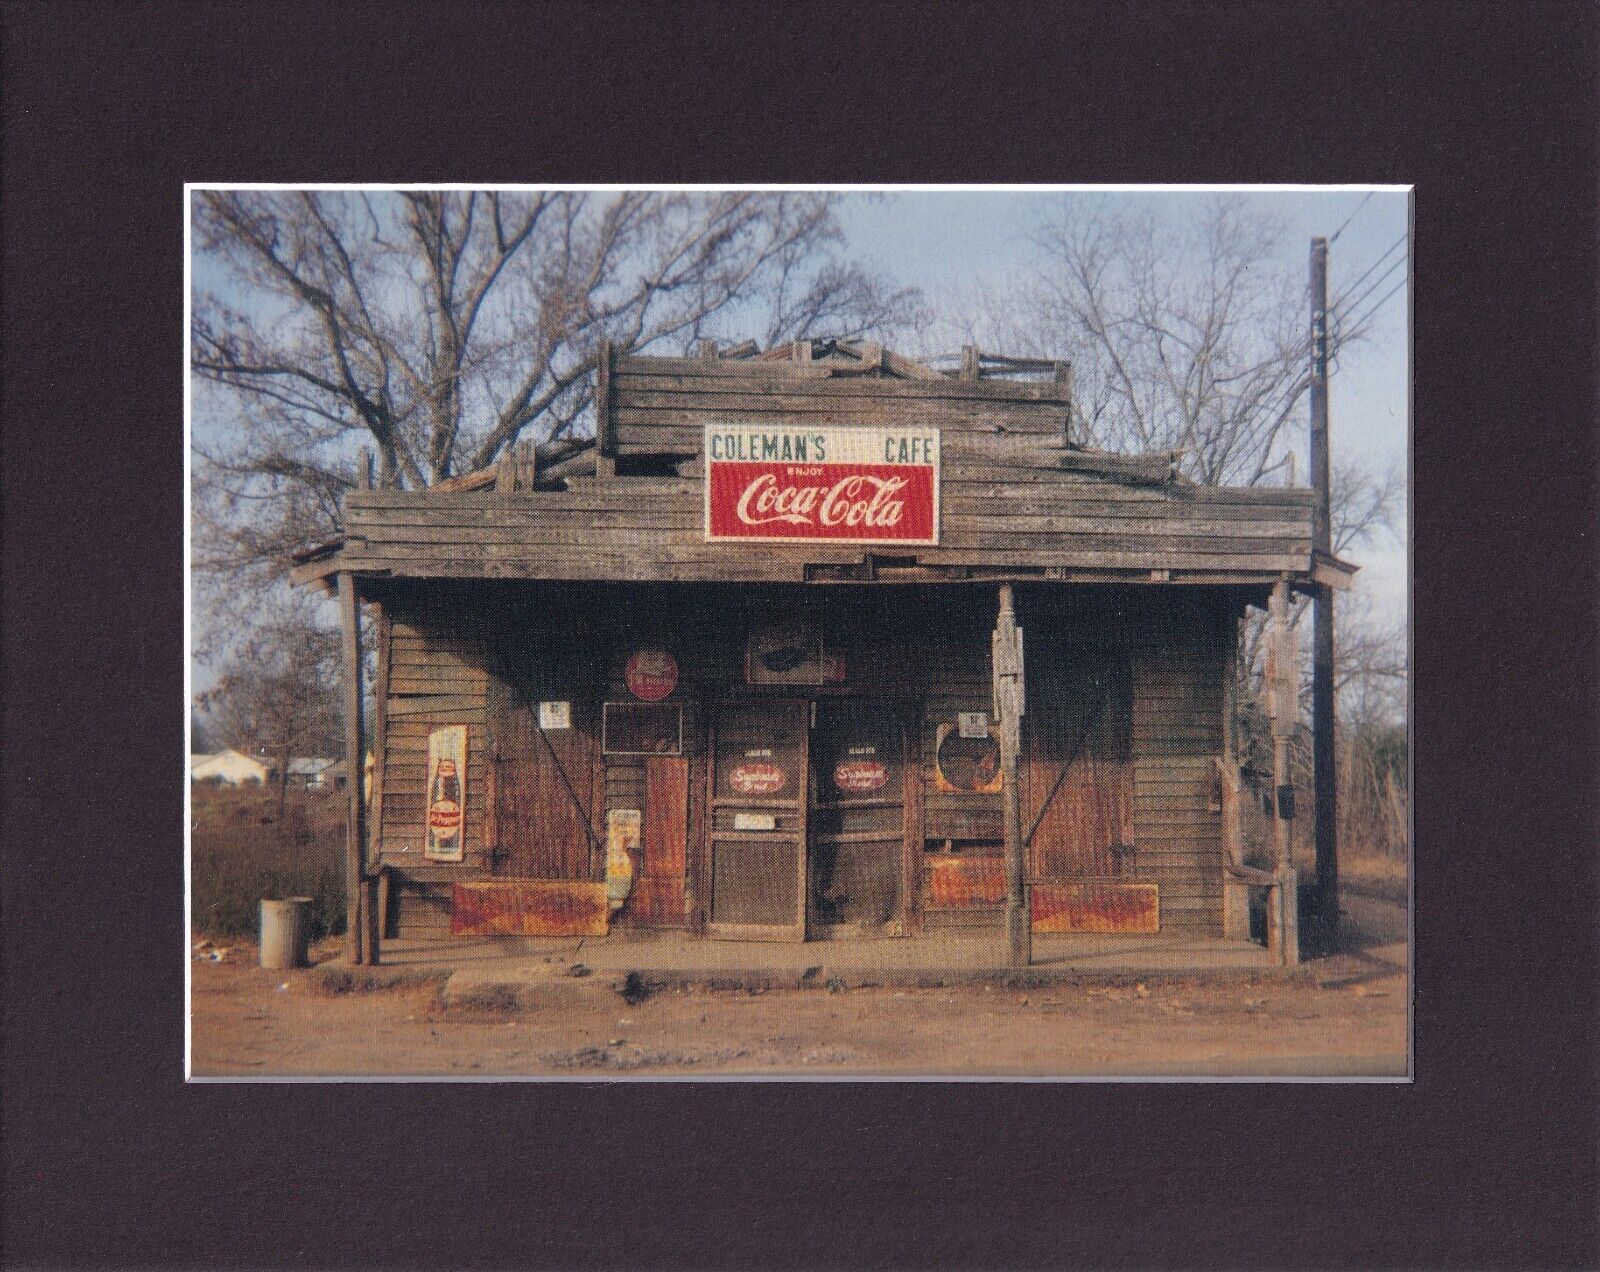 8X10 Matted Print Photo Picture: William Christenberry, 1971 Coleme's Cafe